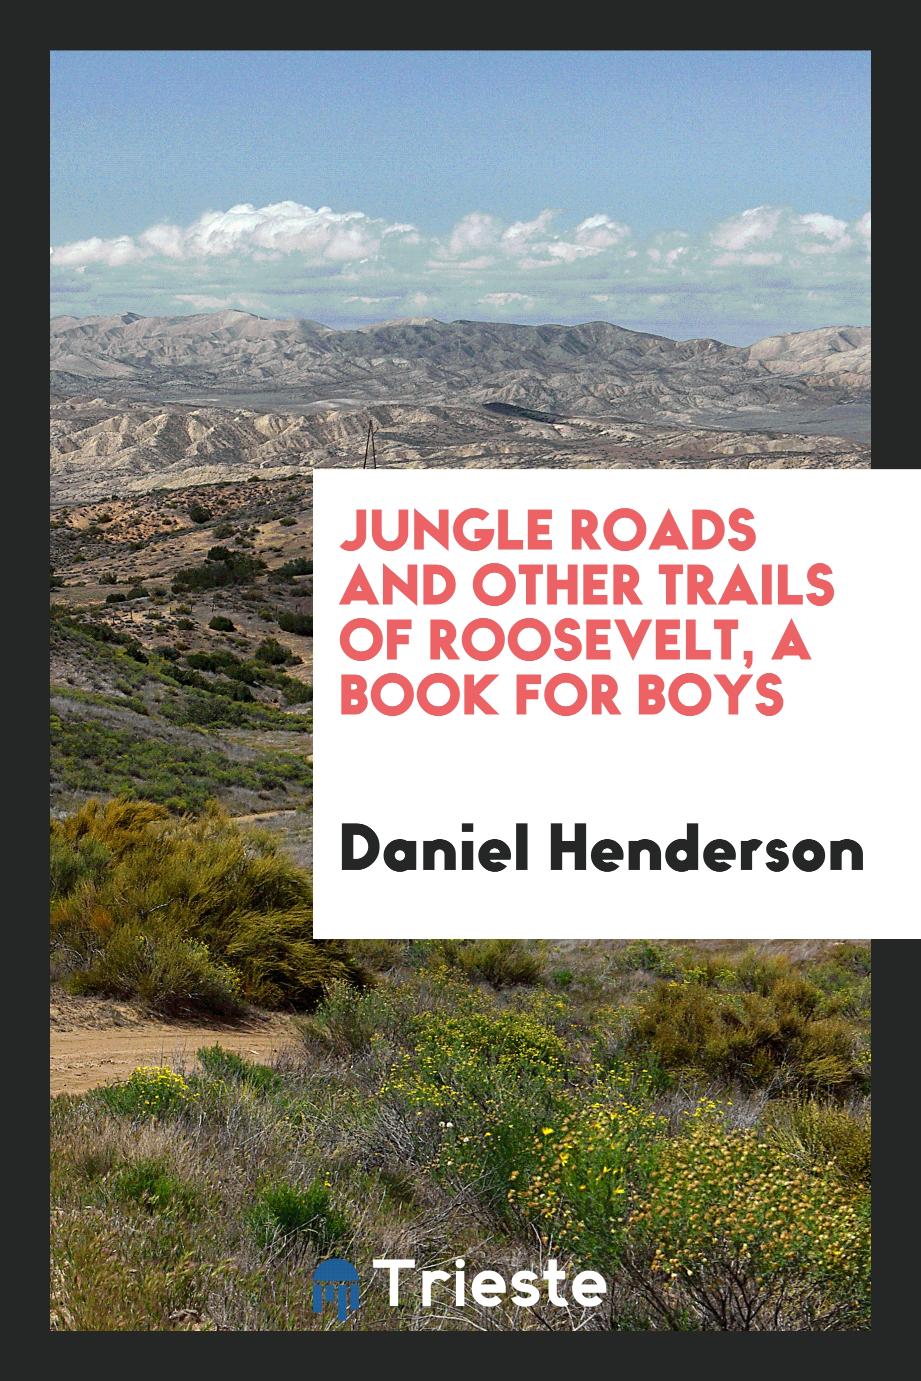 Jungle roads and other trails of Roosevelt, a book for boys